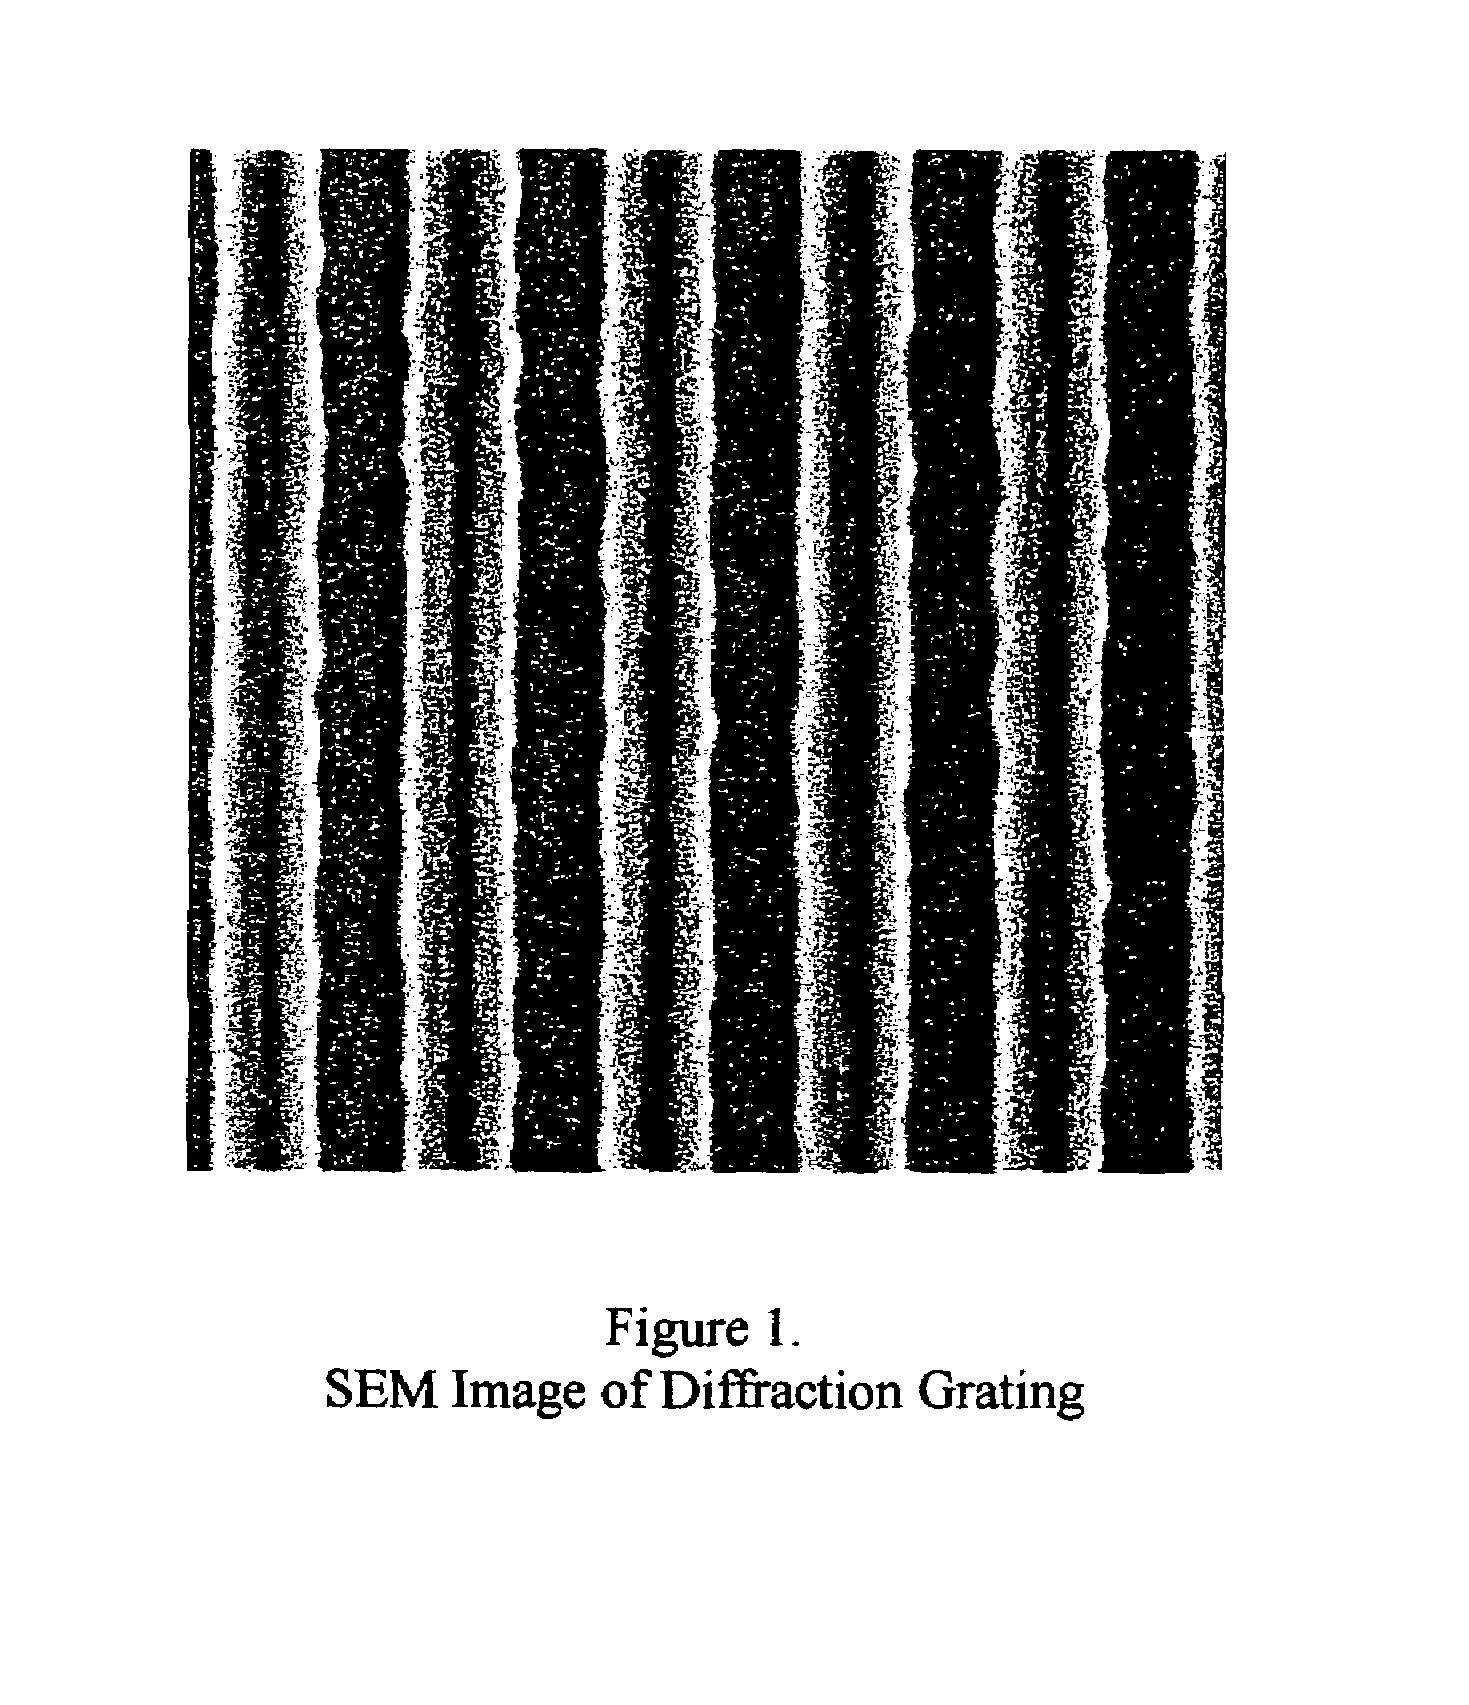 Method of calibration of magnification of microscopes having different operational principles for bringing them into a single, absolute scale